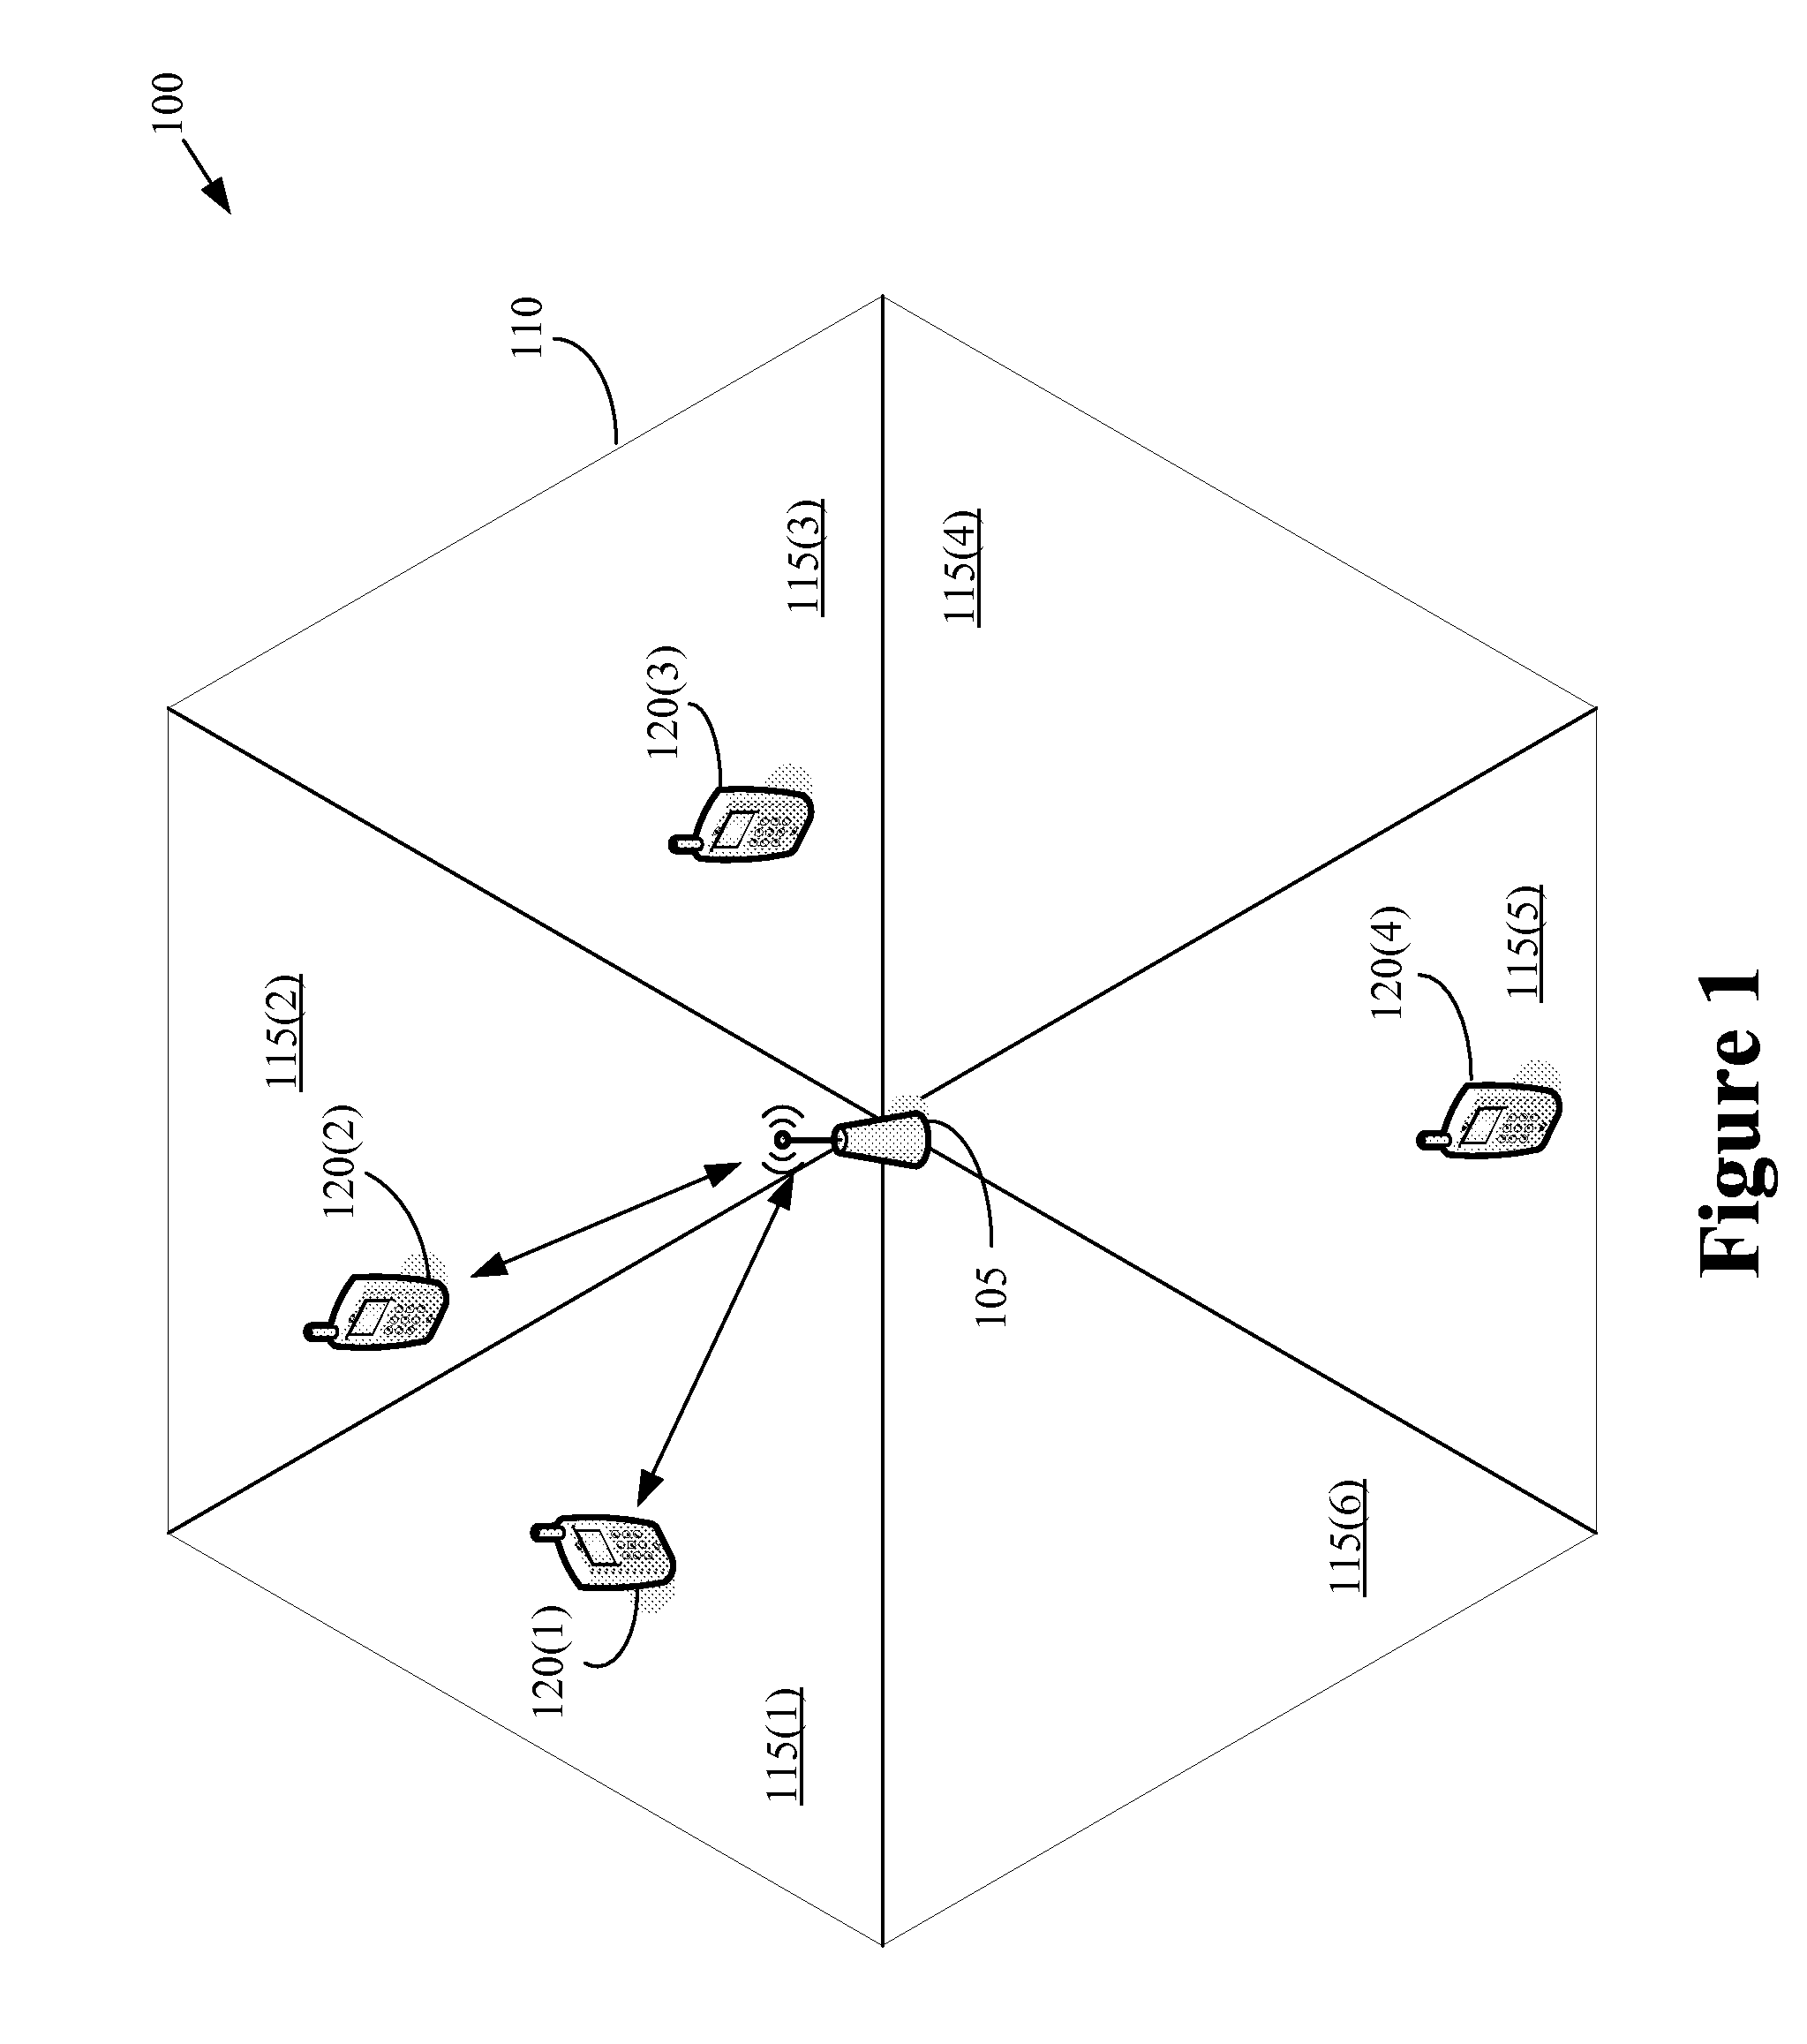 Inter-sector macrodiversity interference cancellation and scheduling